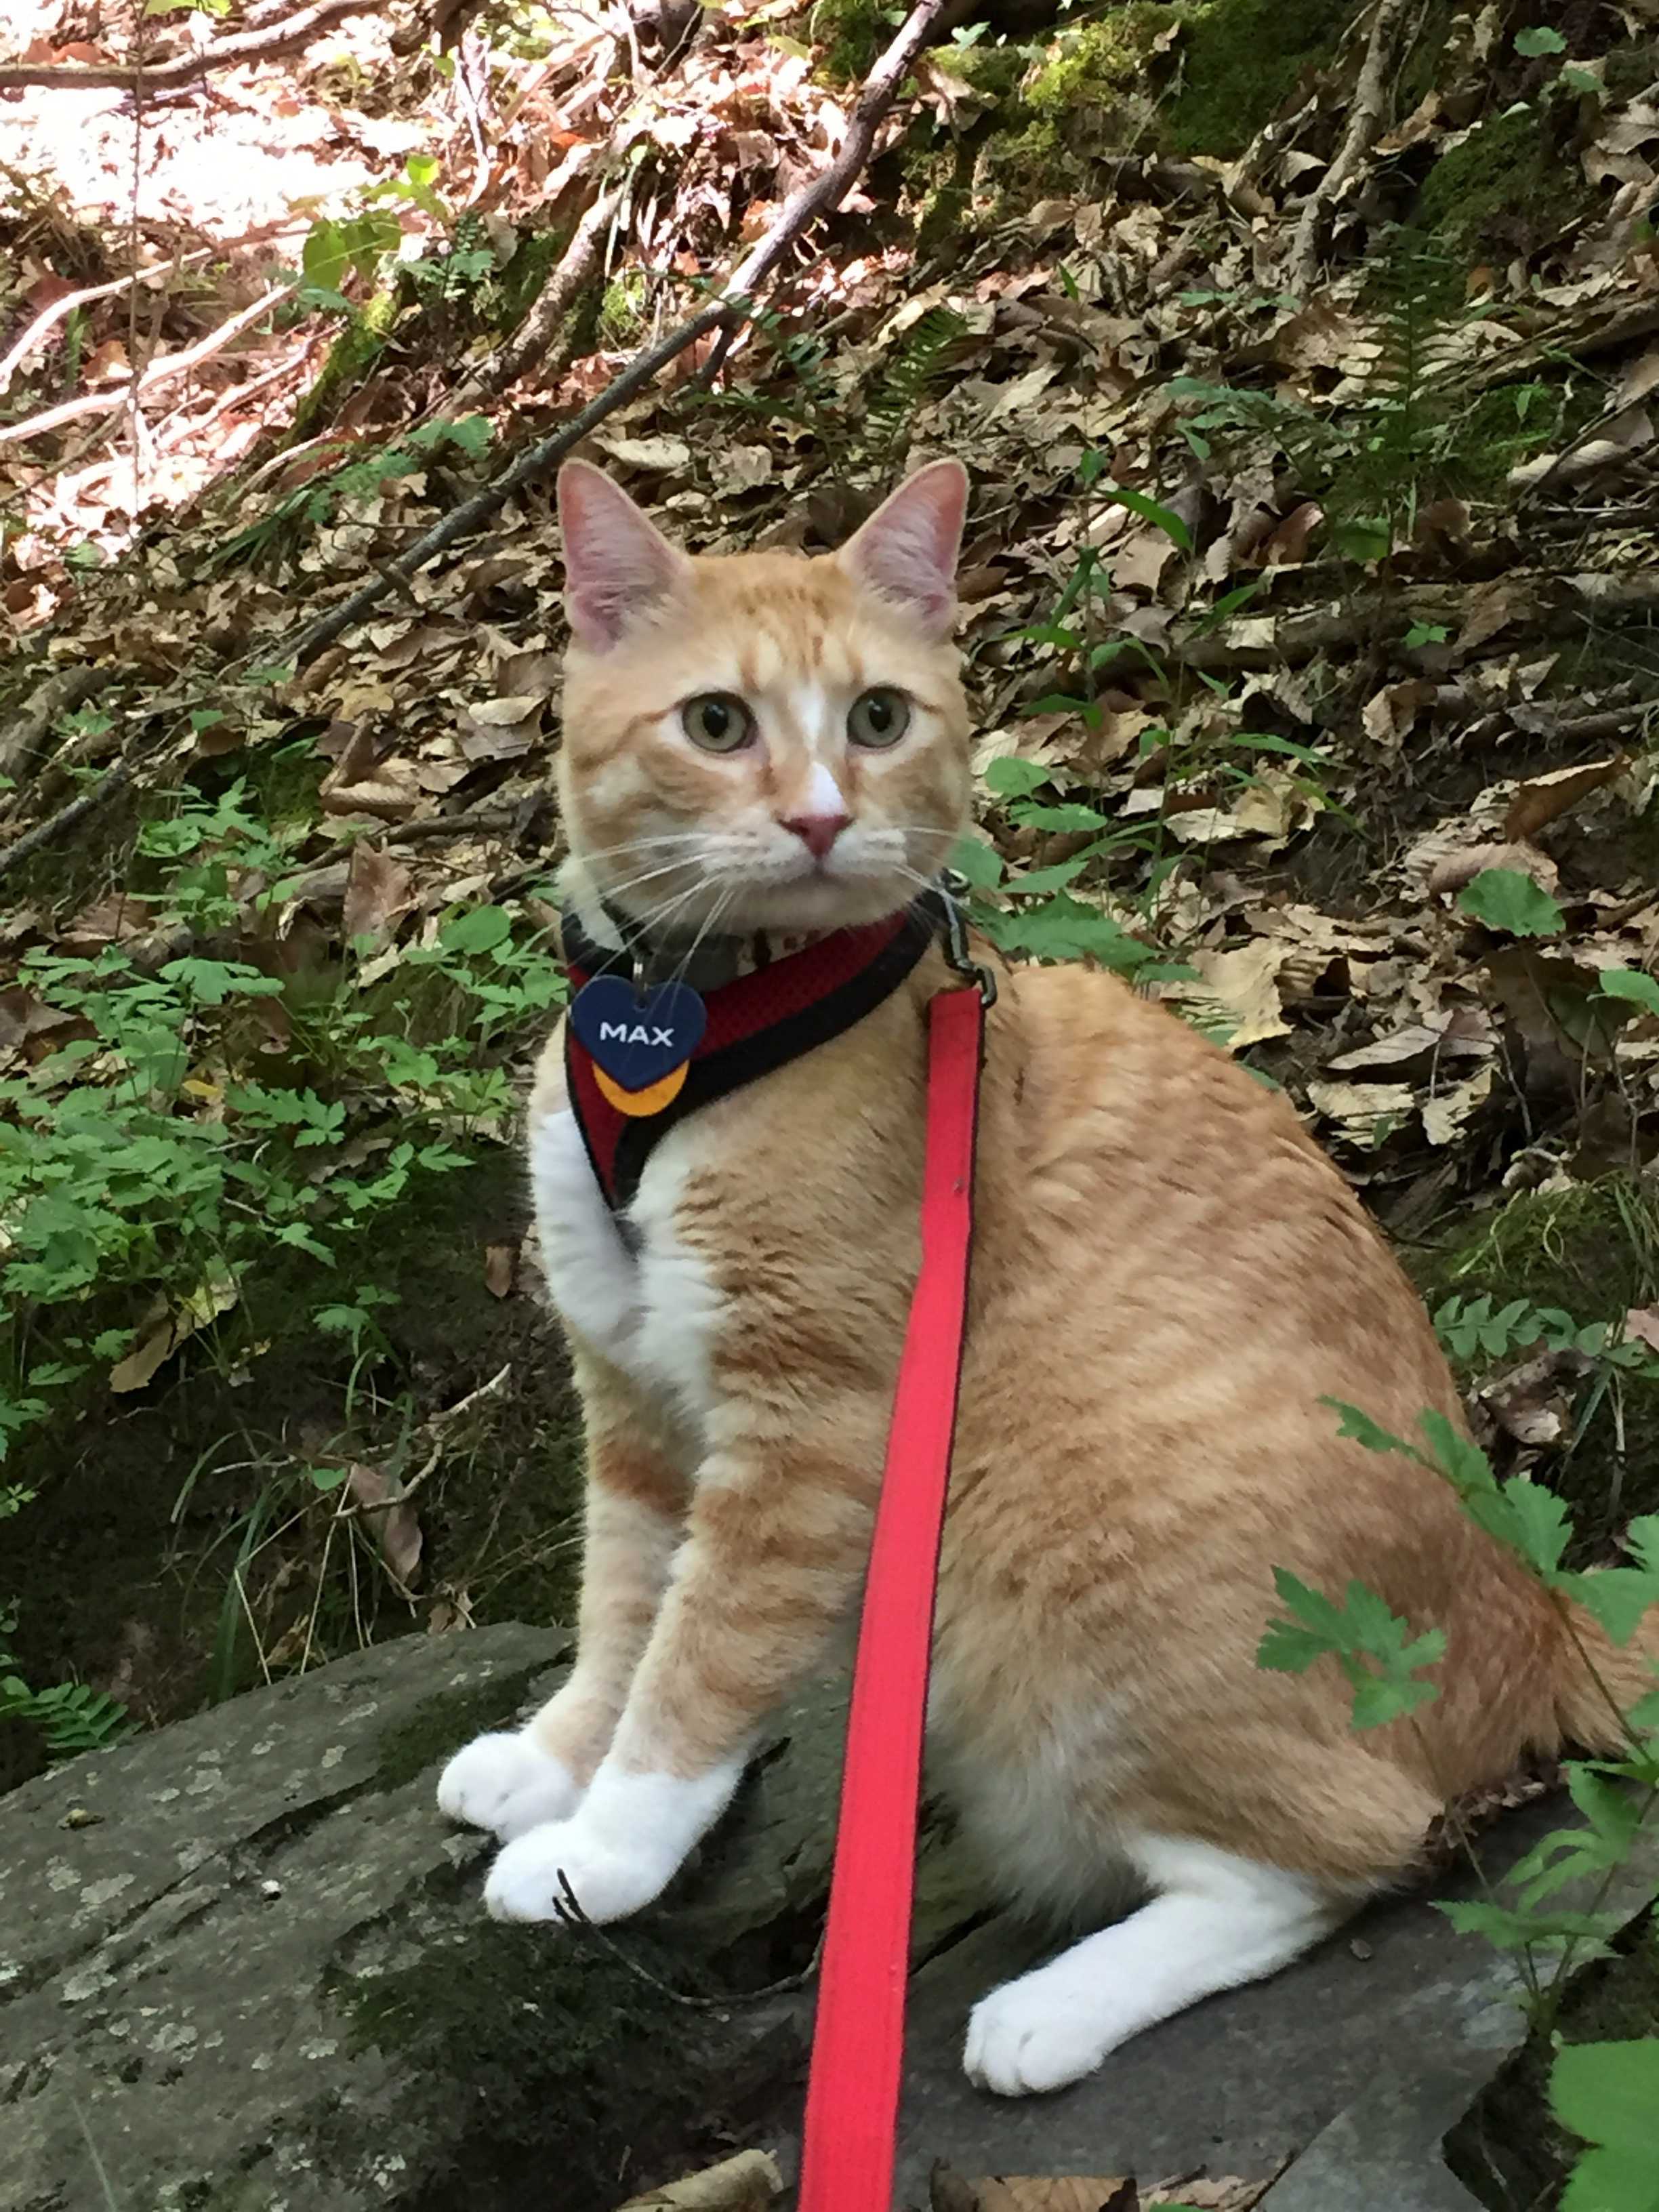 Max the Cat: Where is he now? - The Mac Weekly